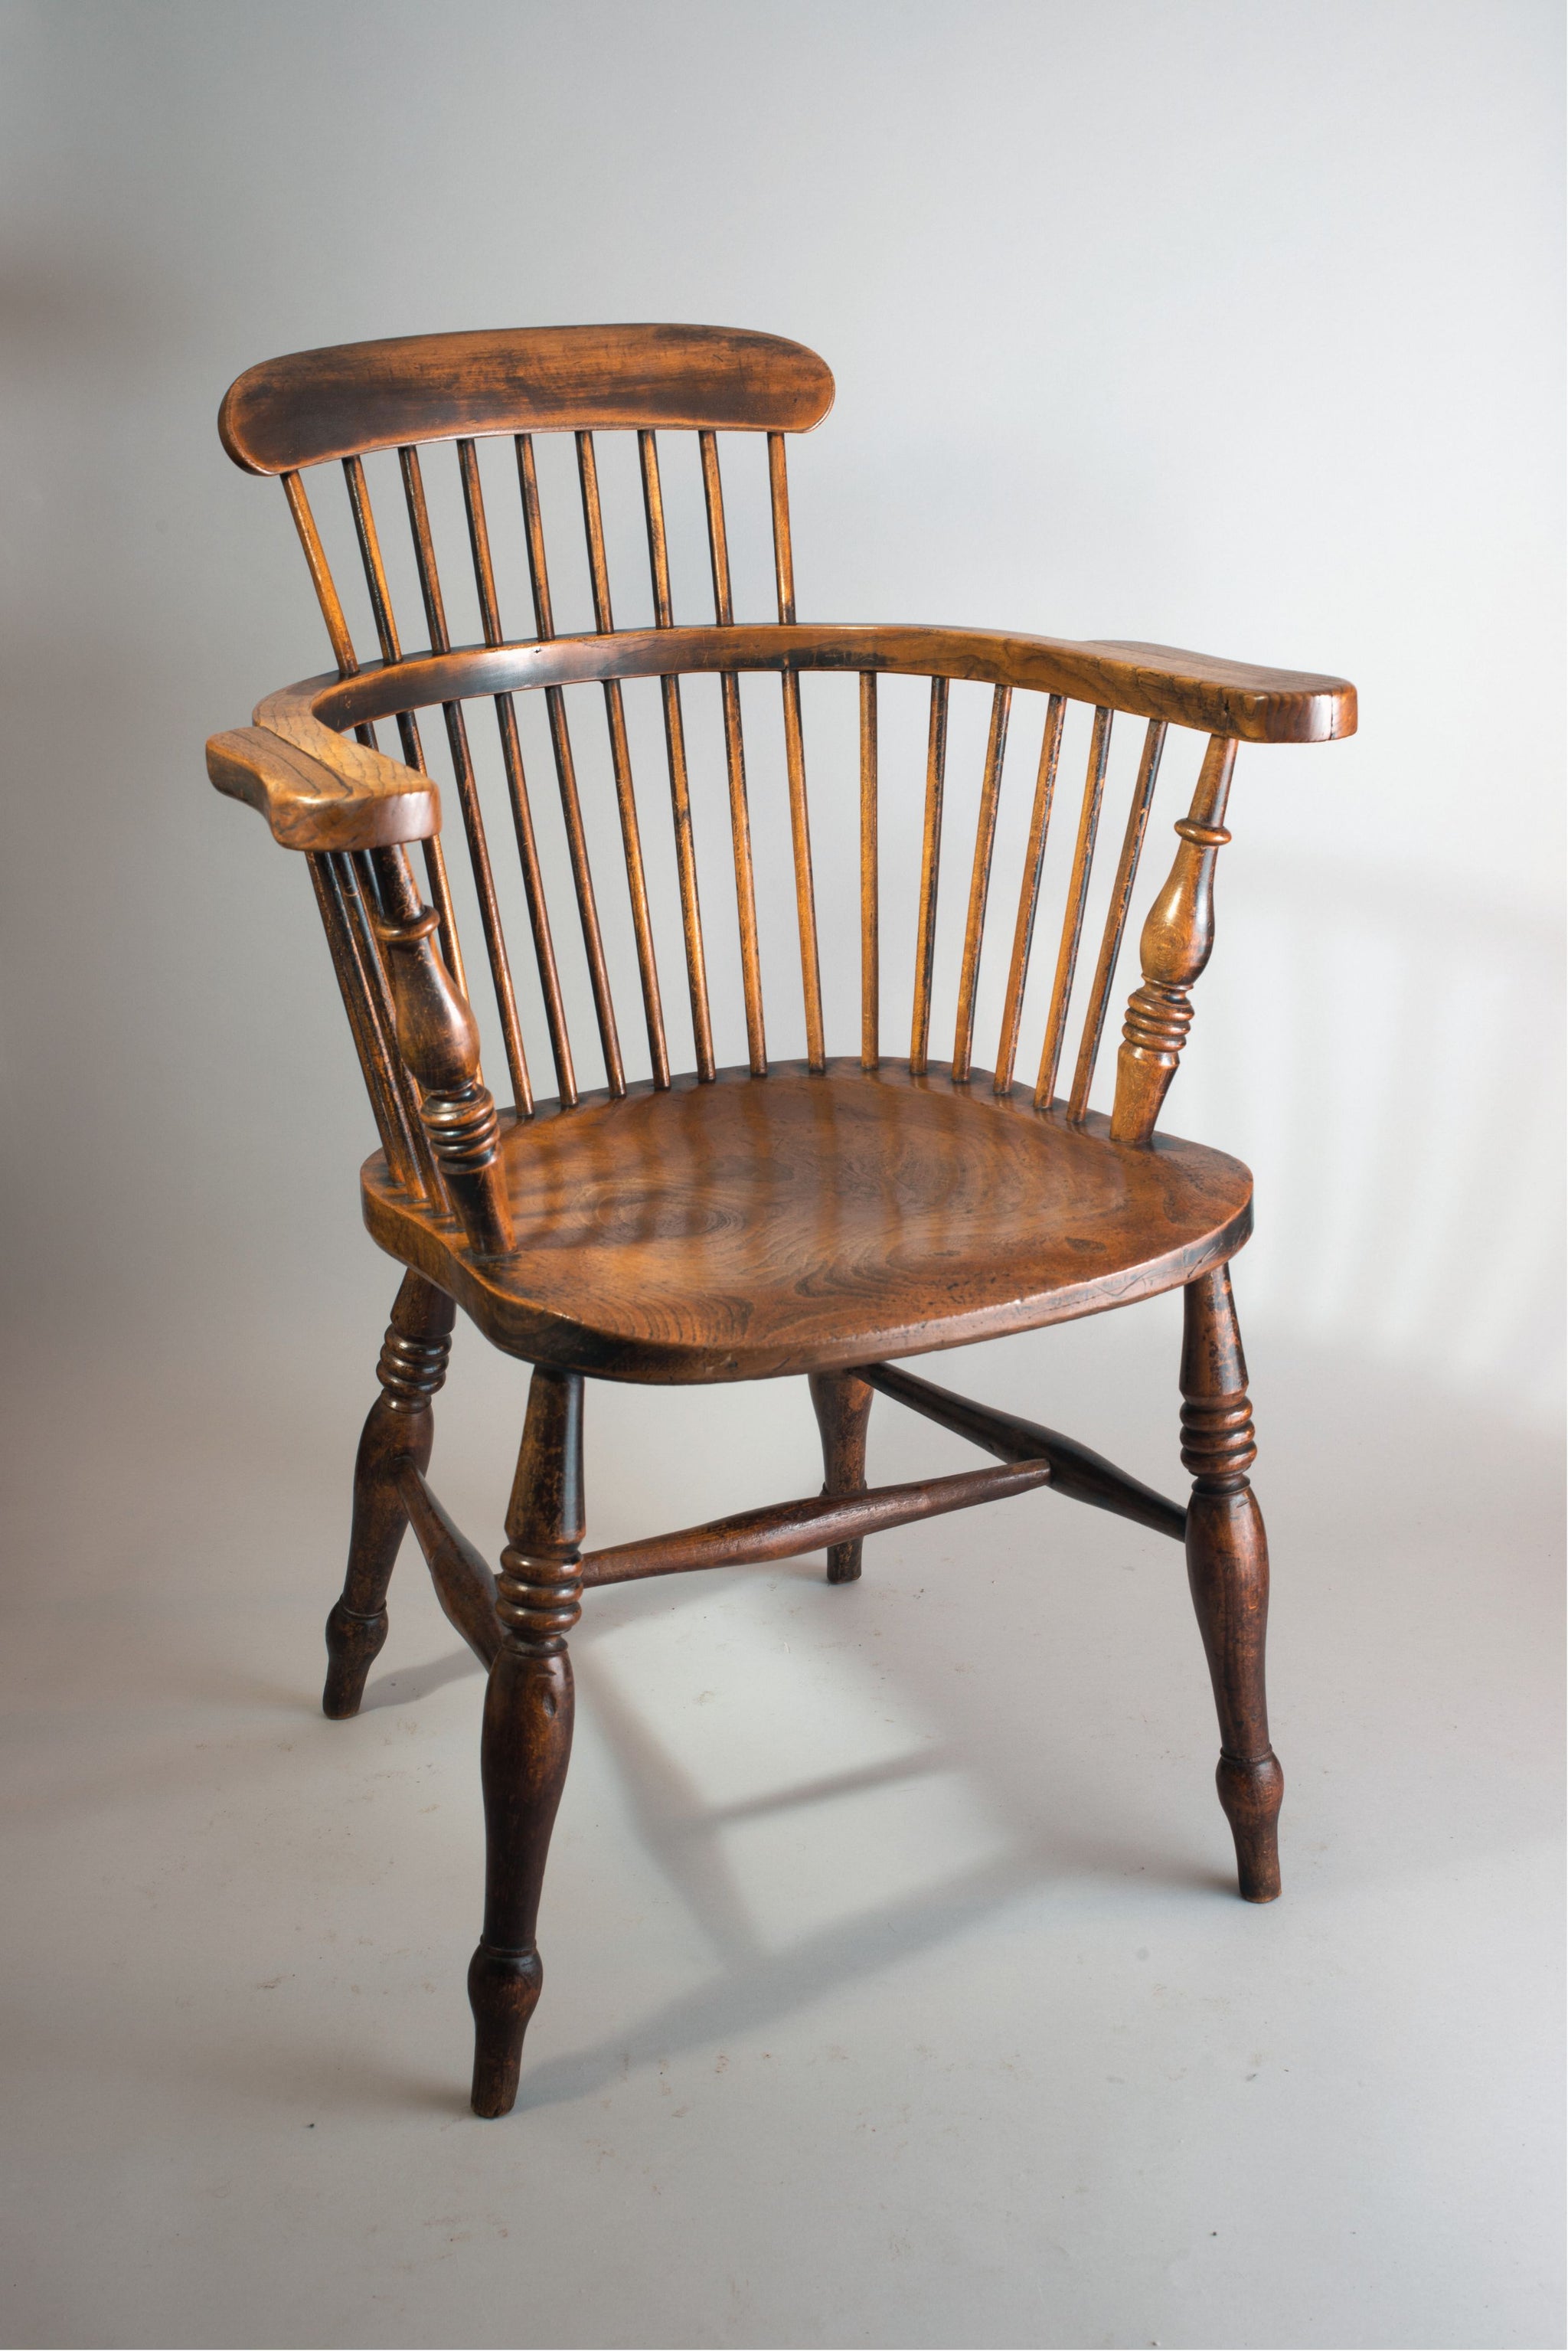 Handsome Comb Back Windsor Chair